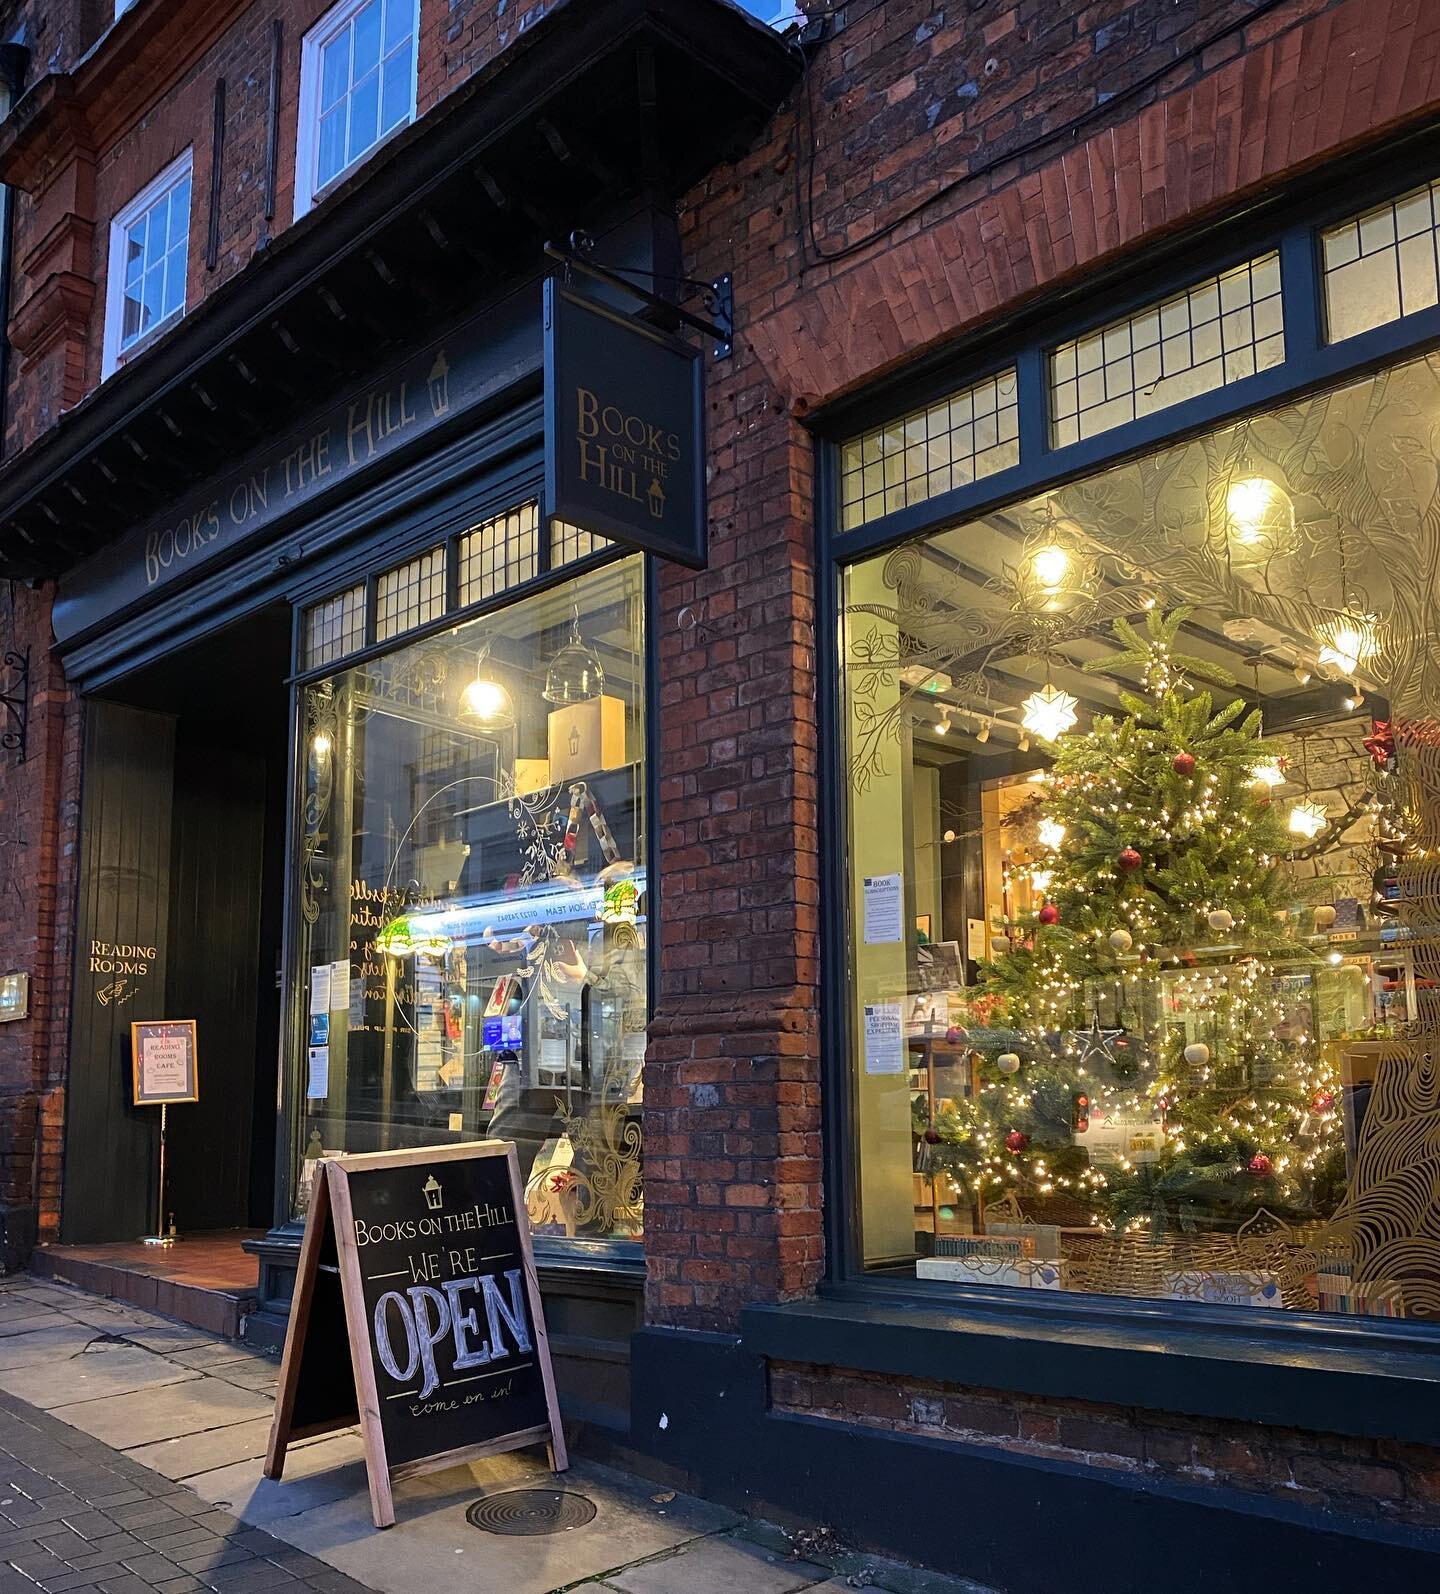 Seasons Greetings 🎄

The windows are looking very festive now with a few extra decorations being added today. 

The team are all looking forward to our upcoming Festive Quiz on 2nd December. With 4 rounds covering literature, films, general knowledg